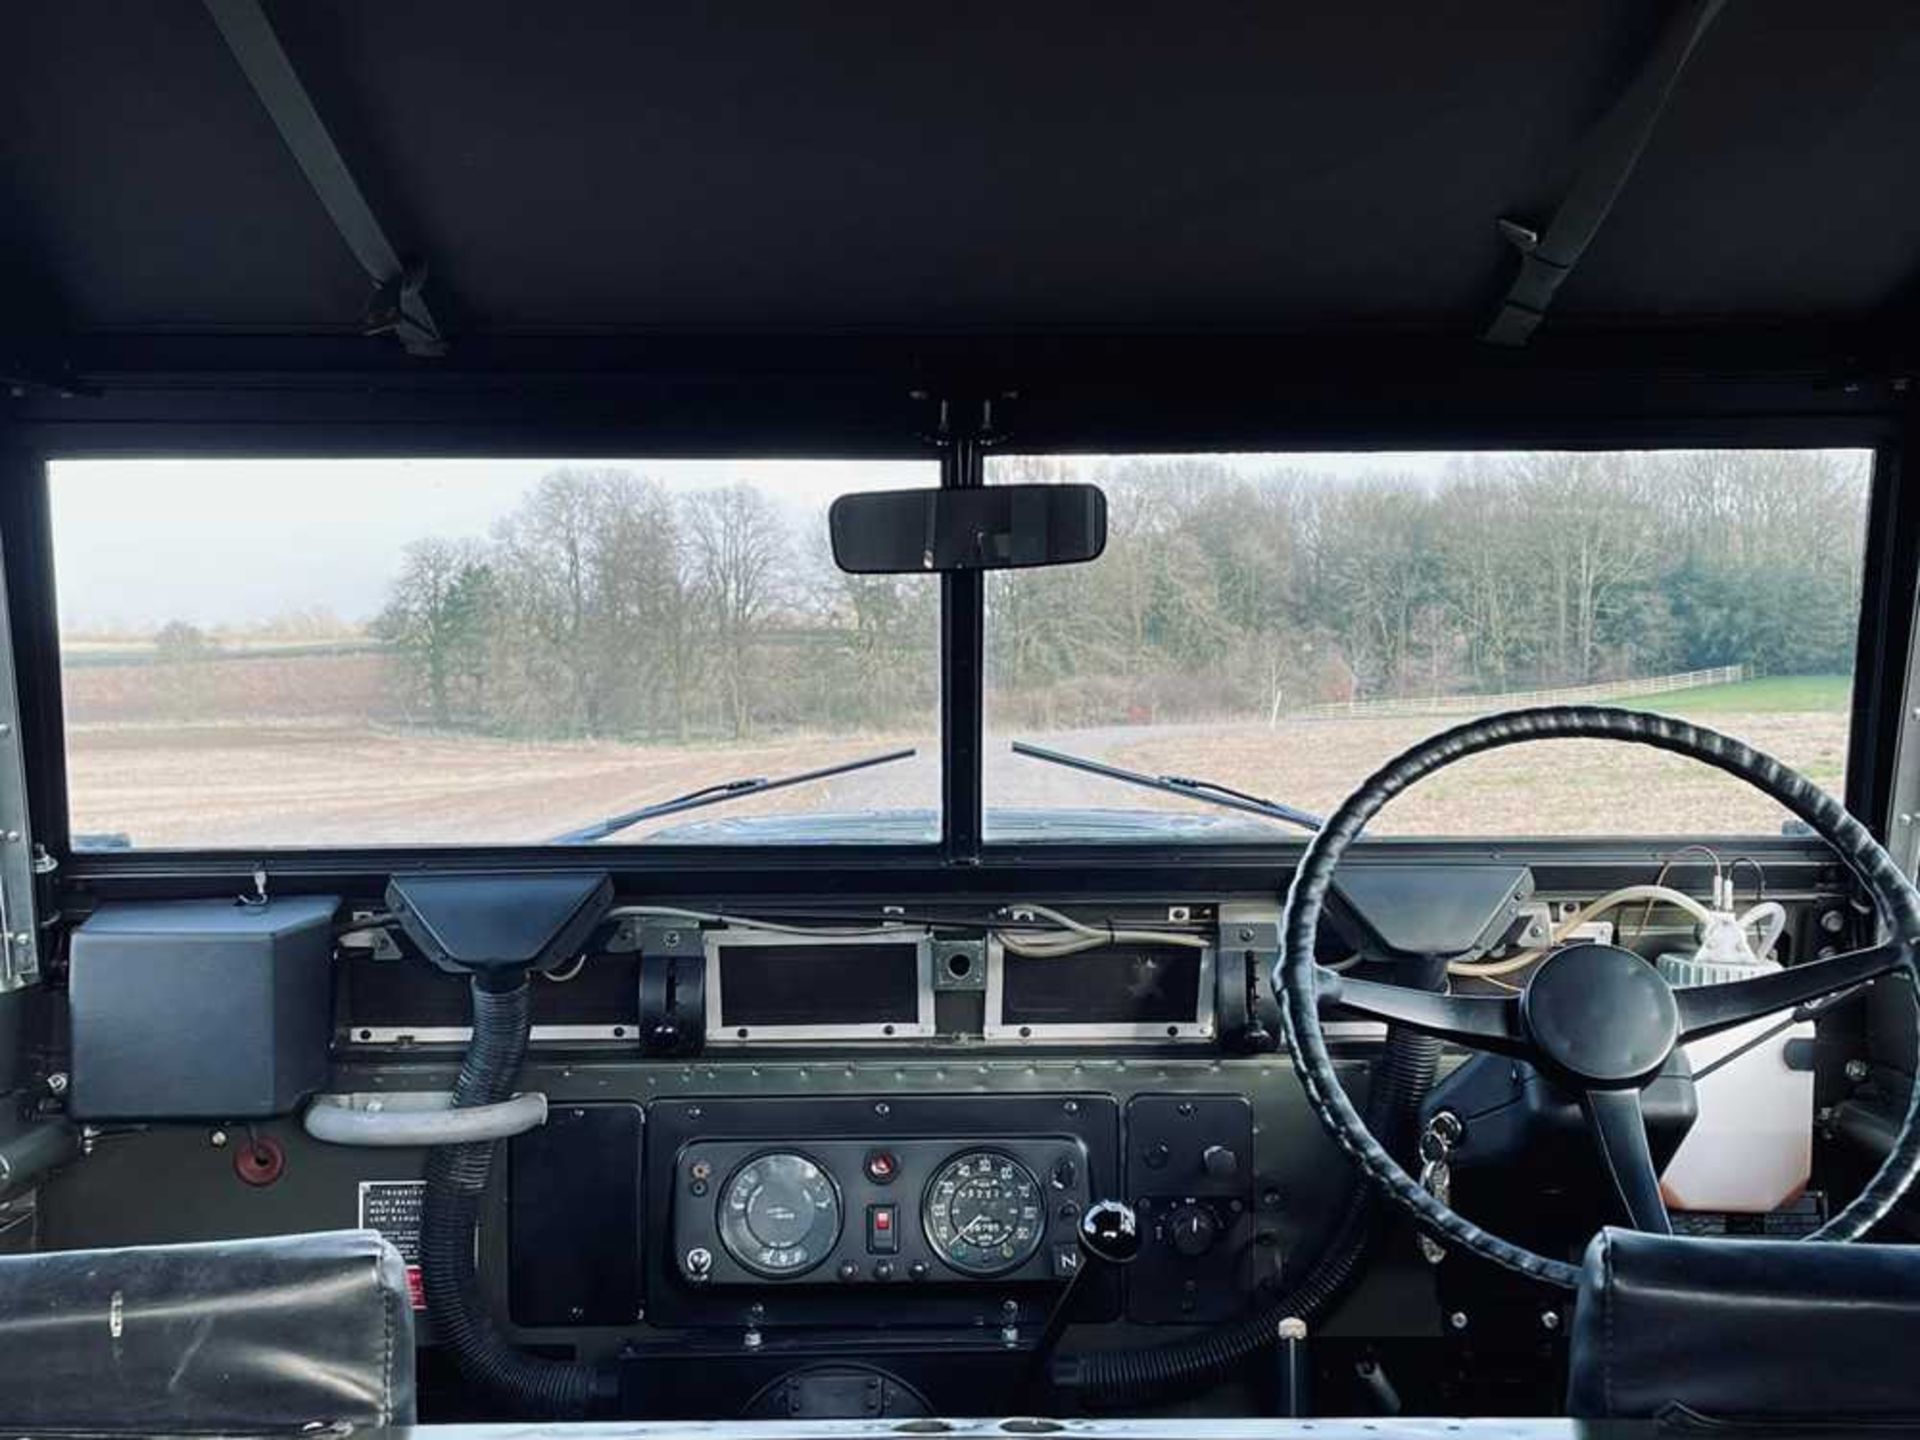 1972 Land Rover 88 Lightweight Extensive restoration recently completed - Image 15 of 22